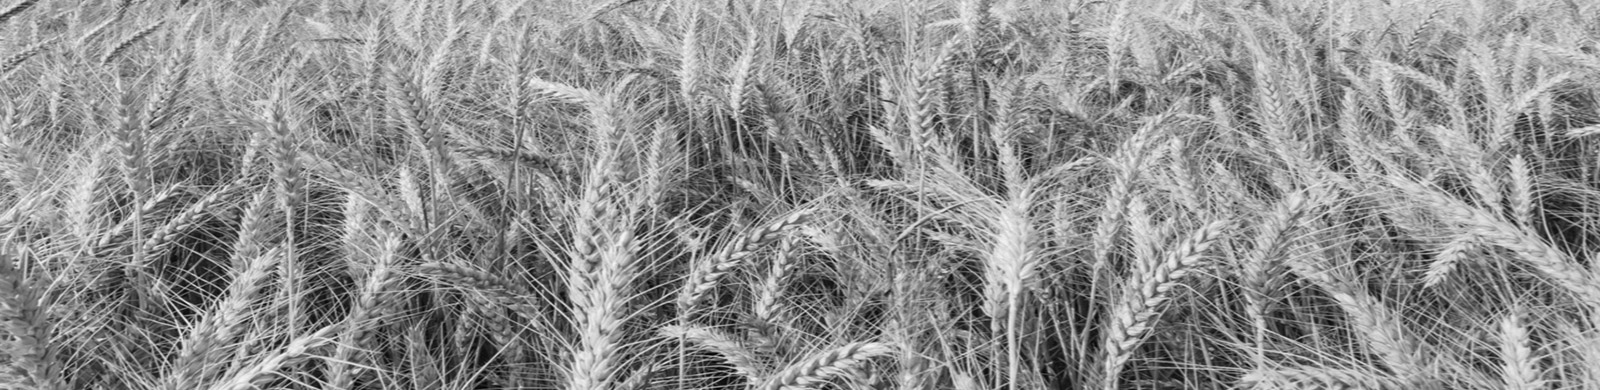 black and white close up photo of wheat